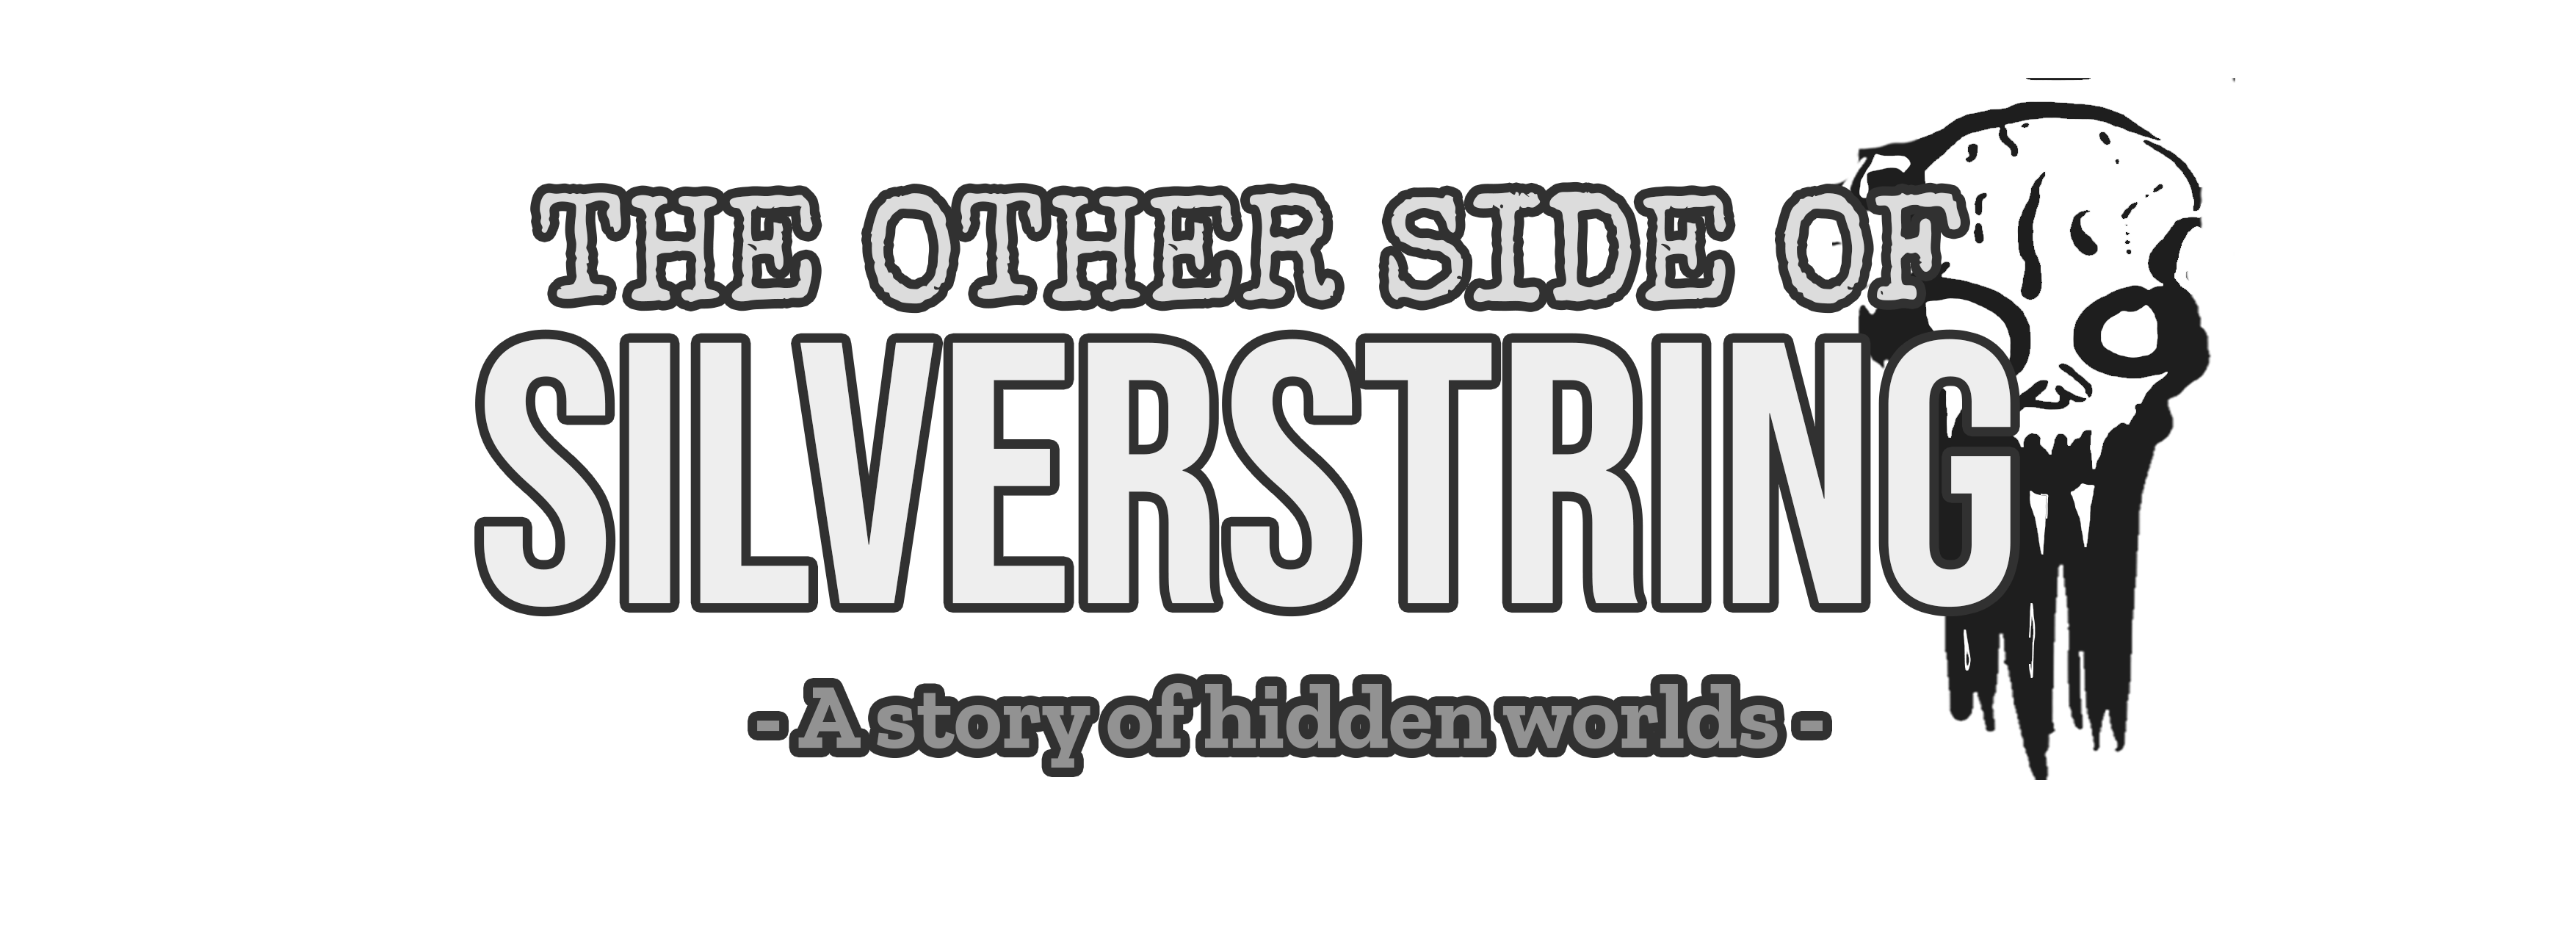 The Other Side of Silverstring